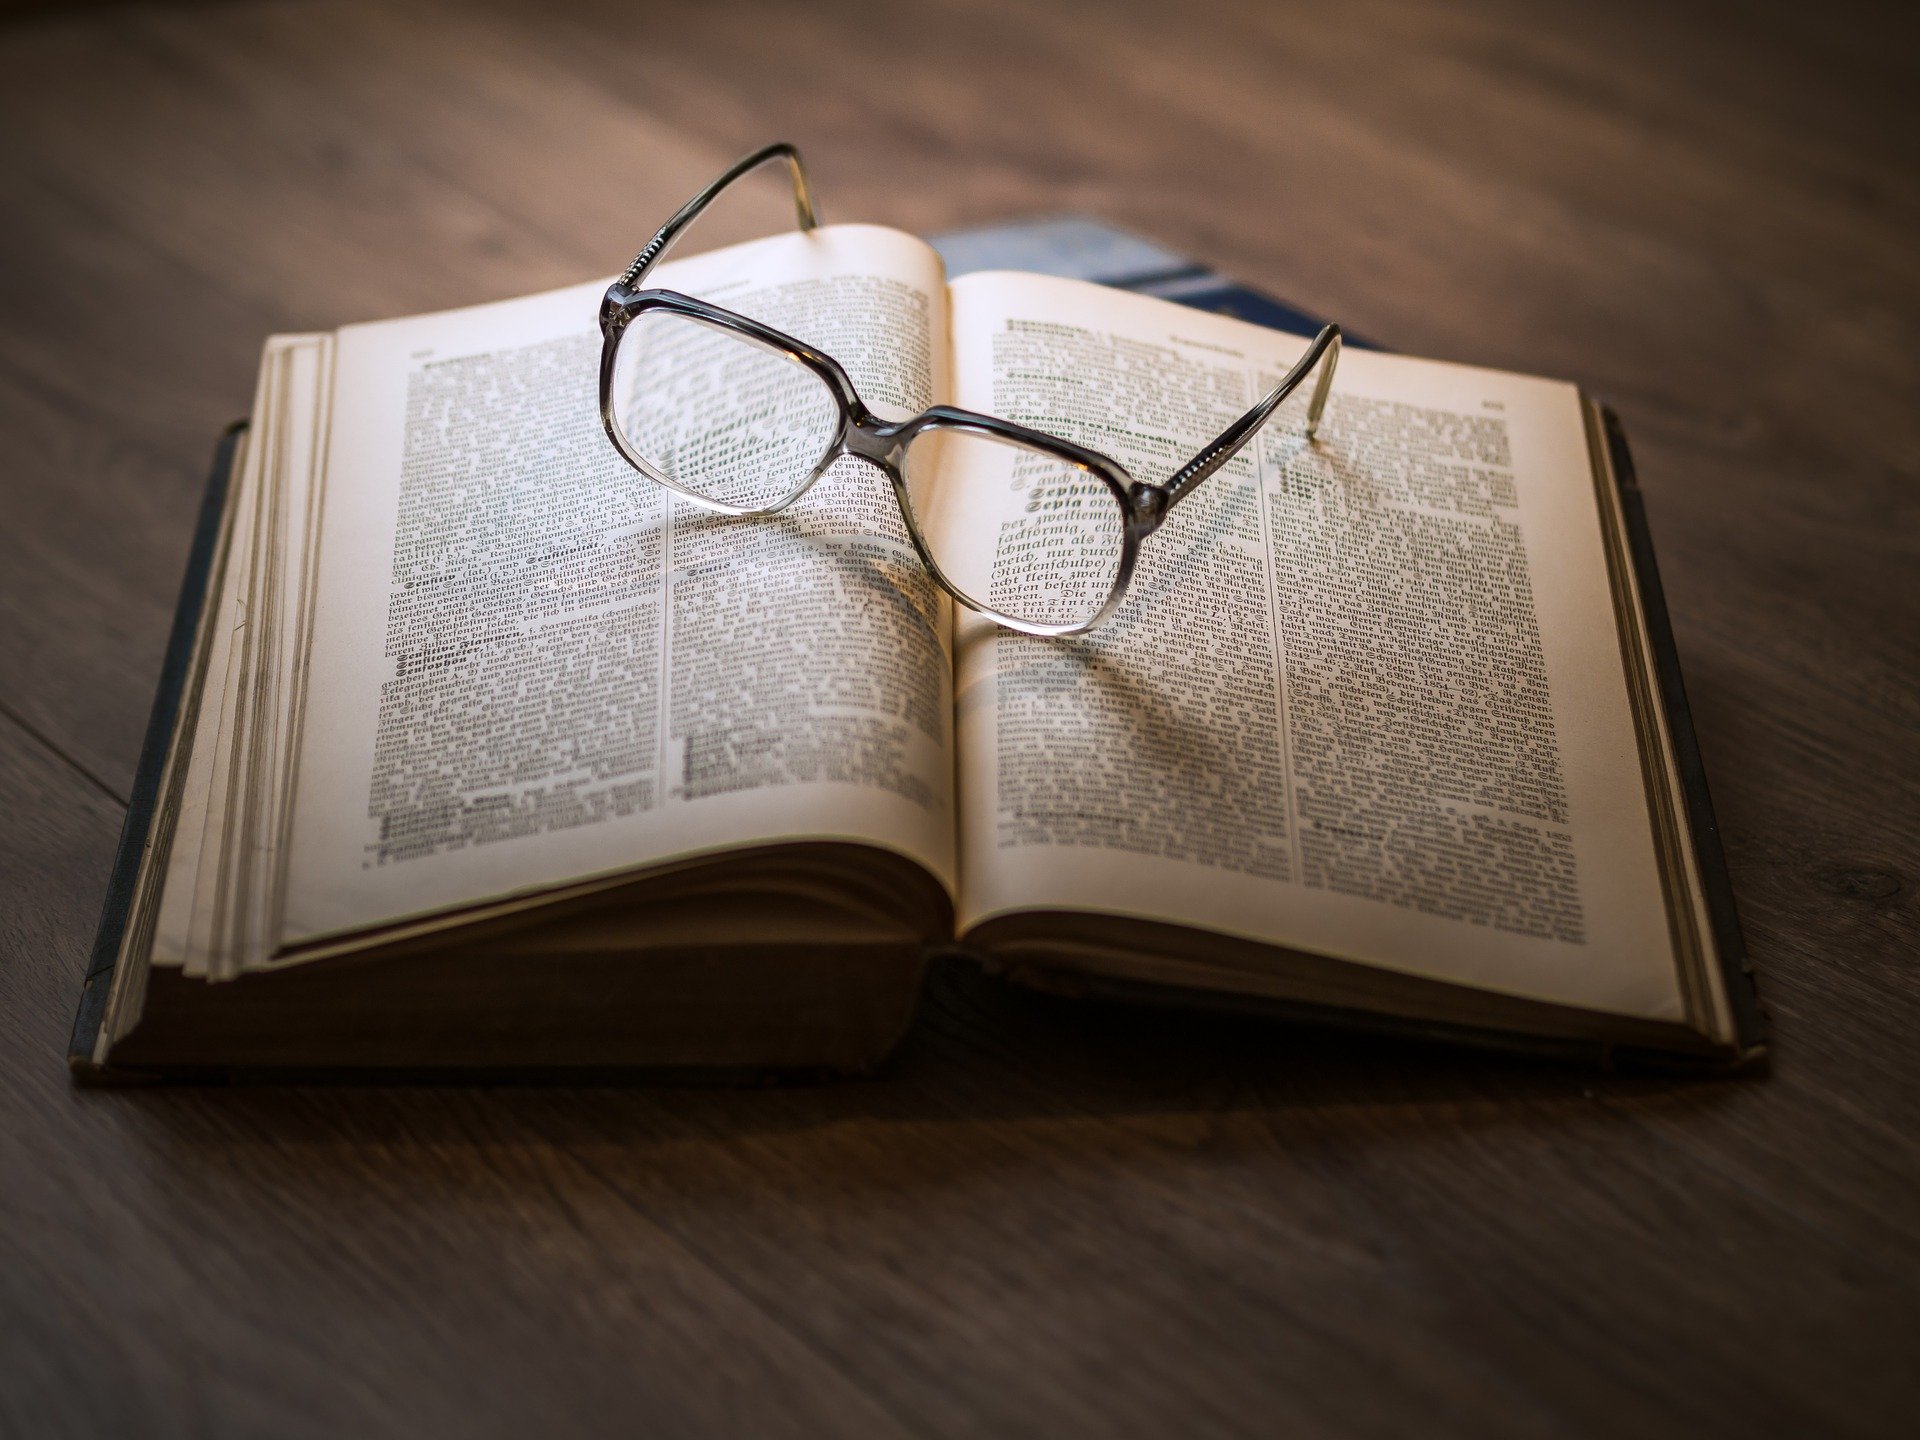 An open book on a desk, with a pair of glasses resting on the pages.